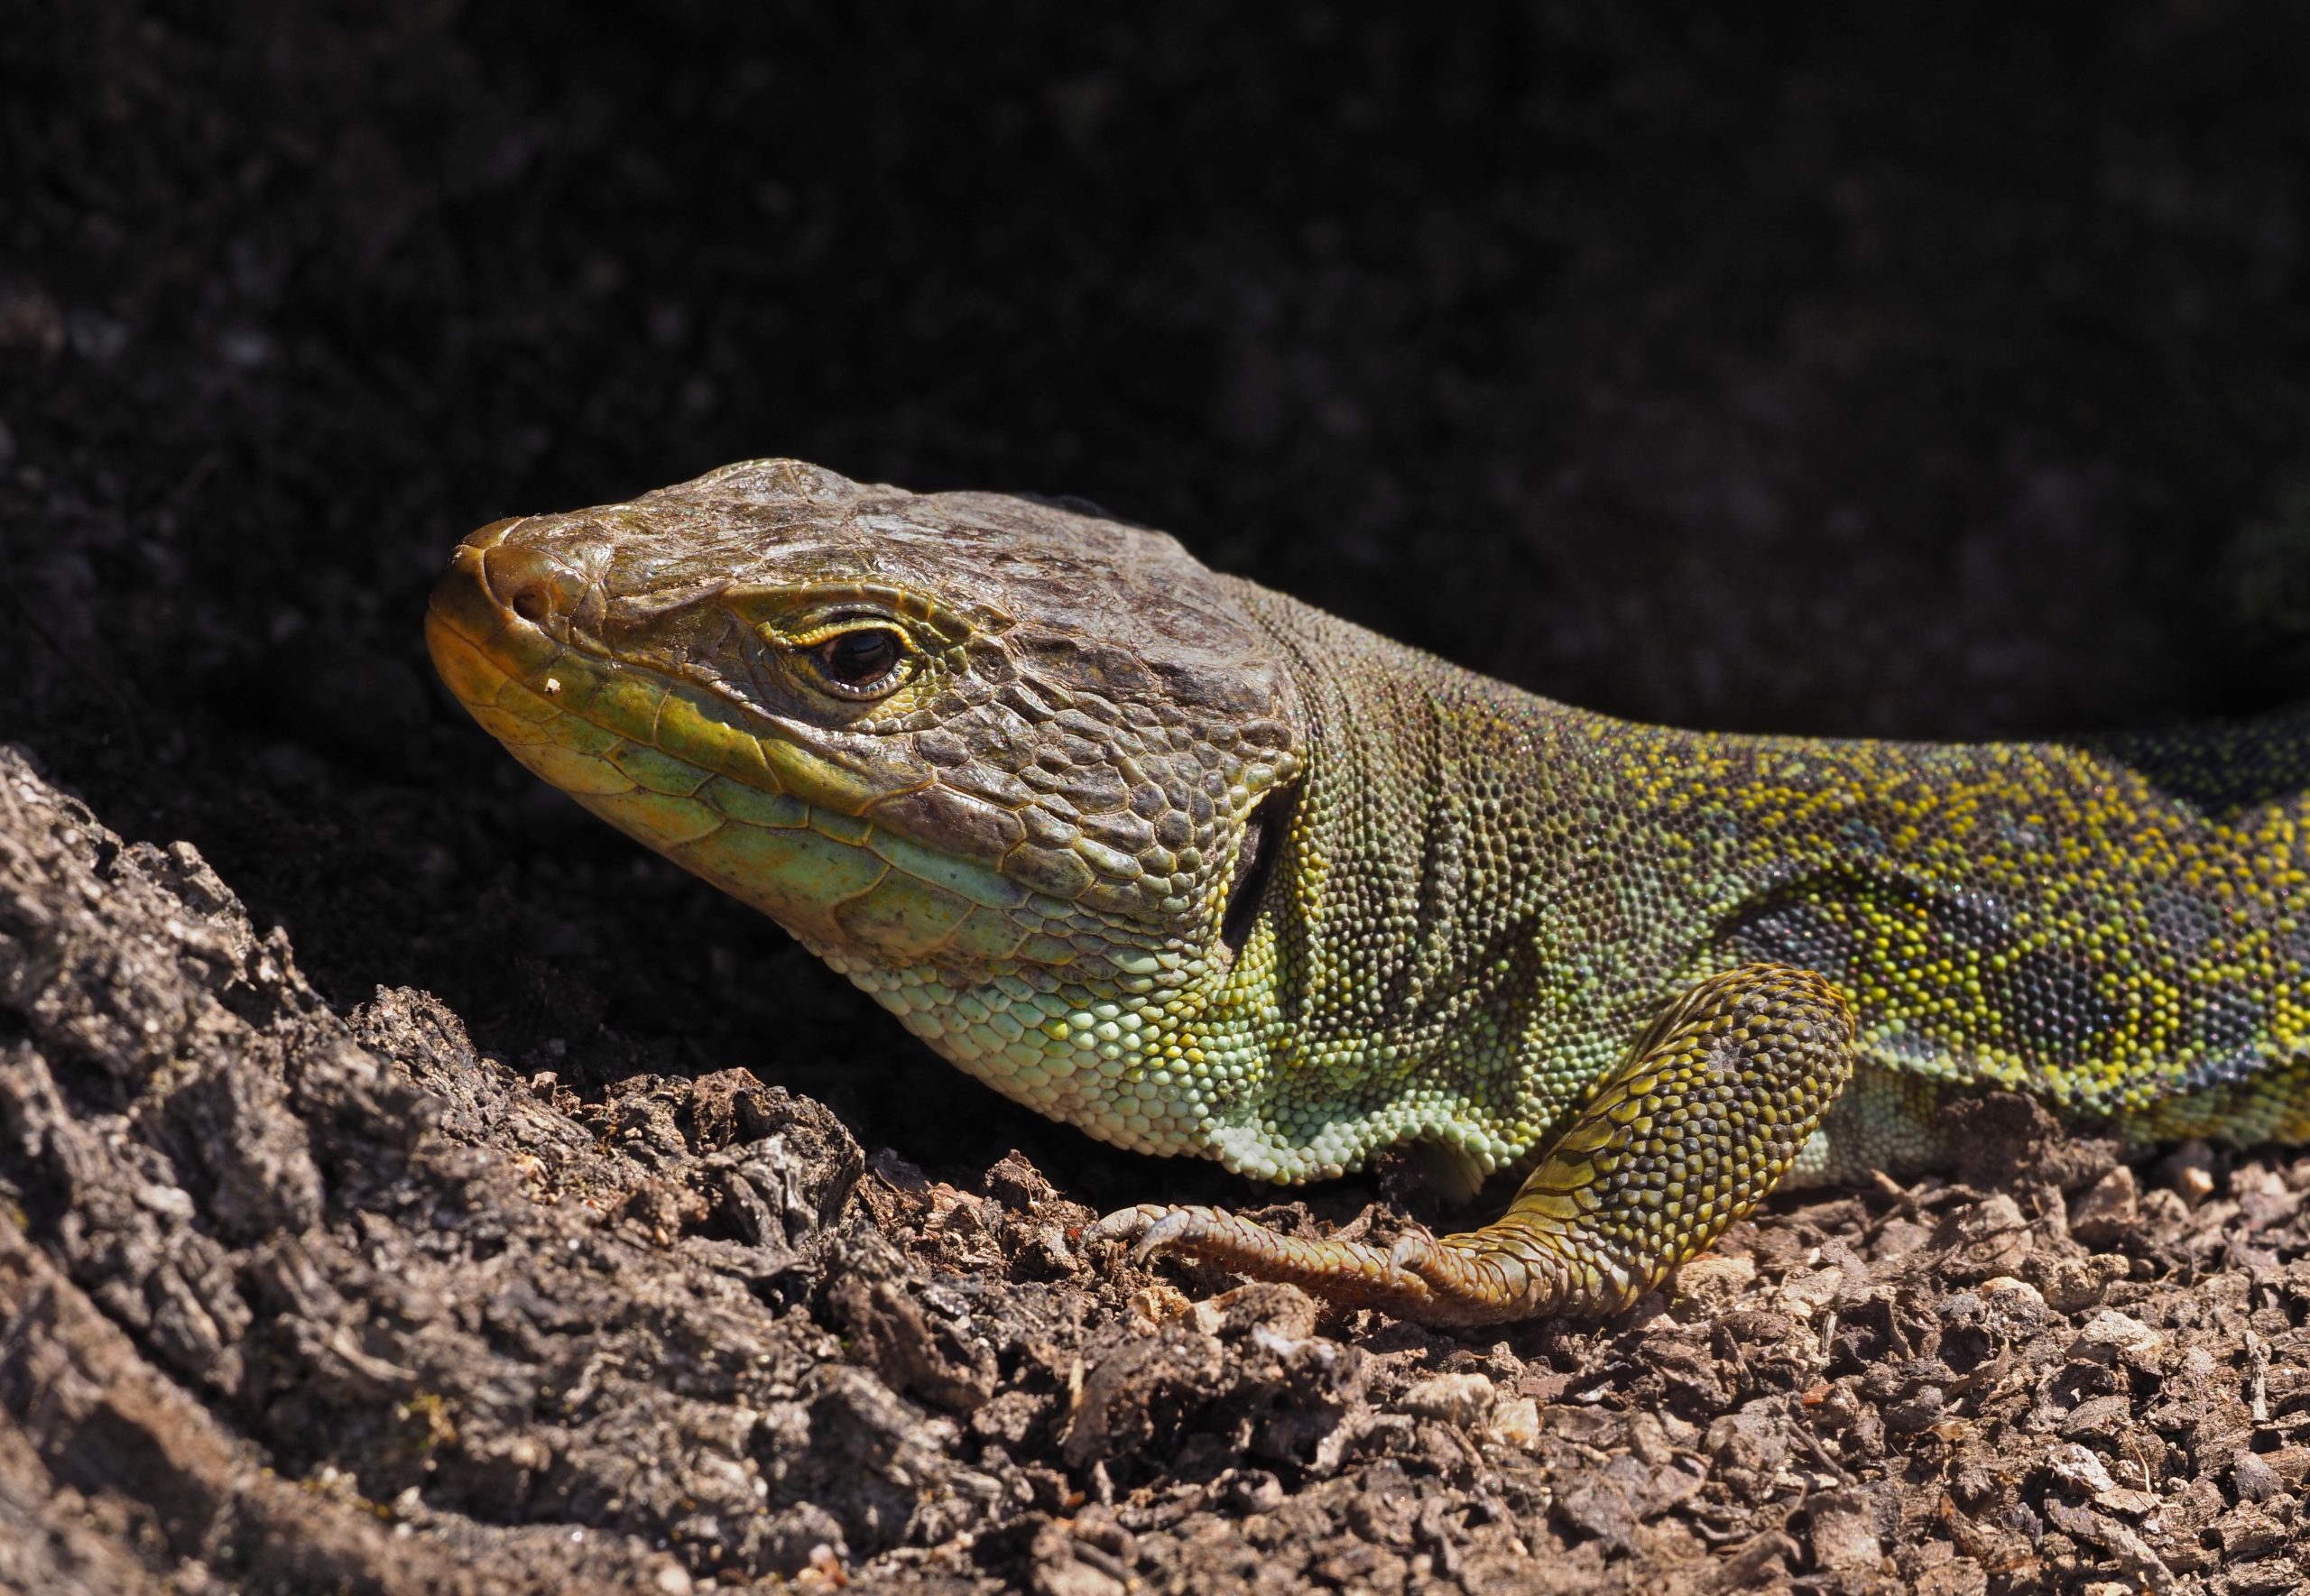 Occellated Lizard found in Galicia